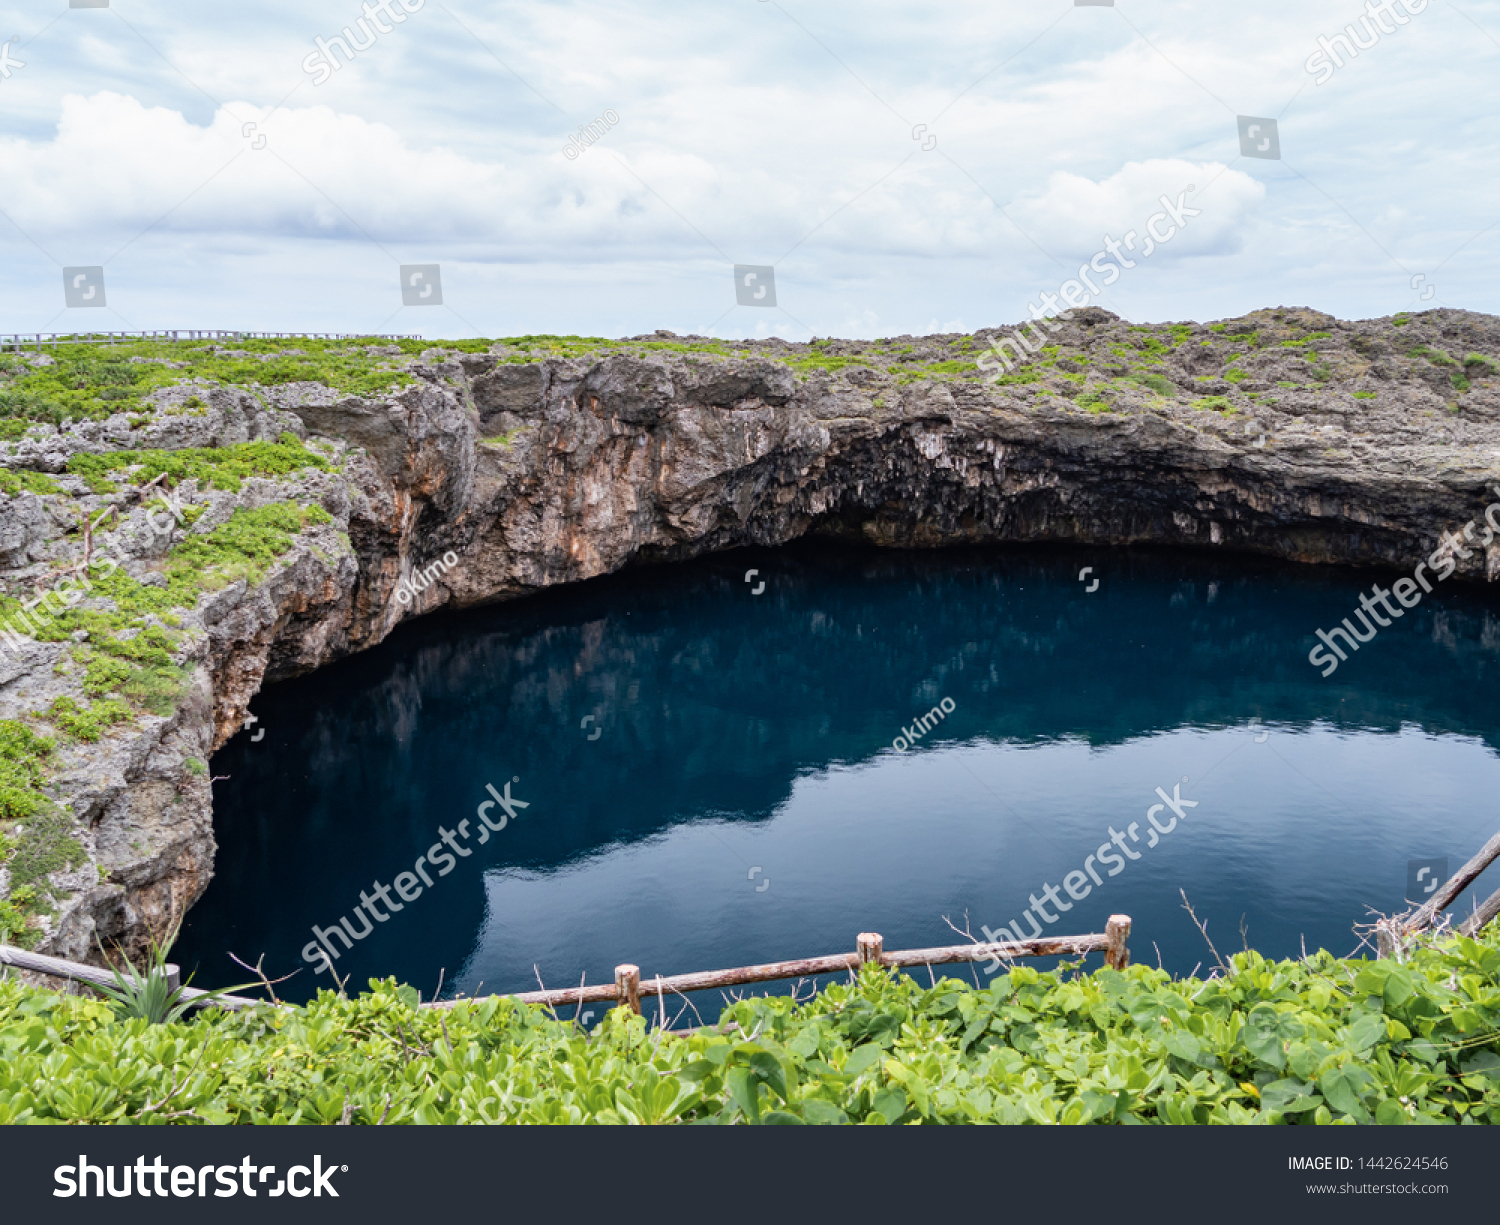 Toriike Pond is a pond located in the western part of Shimojijima Island, Miyakojima, Okinawa, Japan. It looks like two ponds lined up next to each other but they are actually connected underground. #1442624546